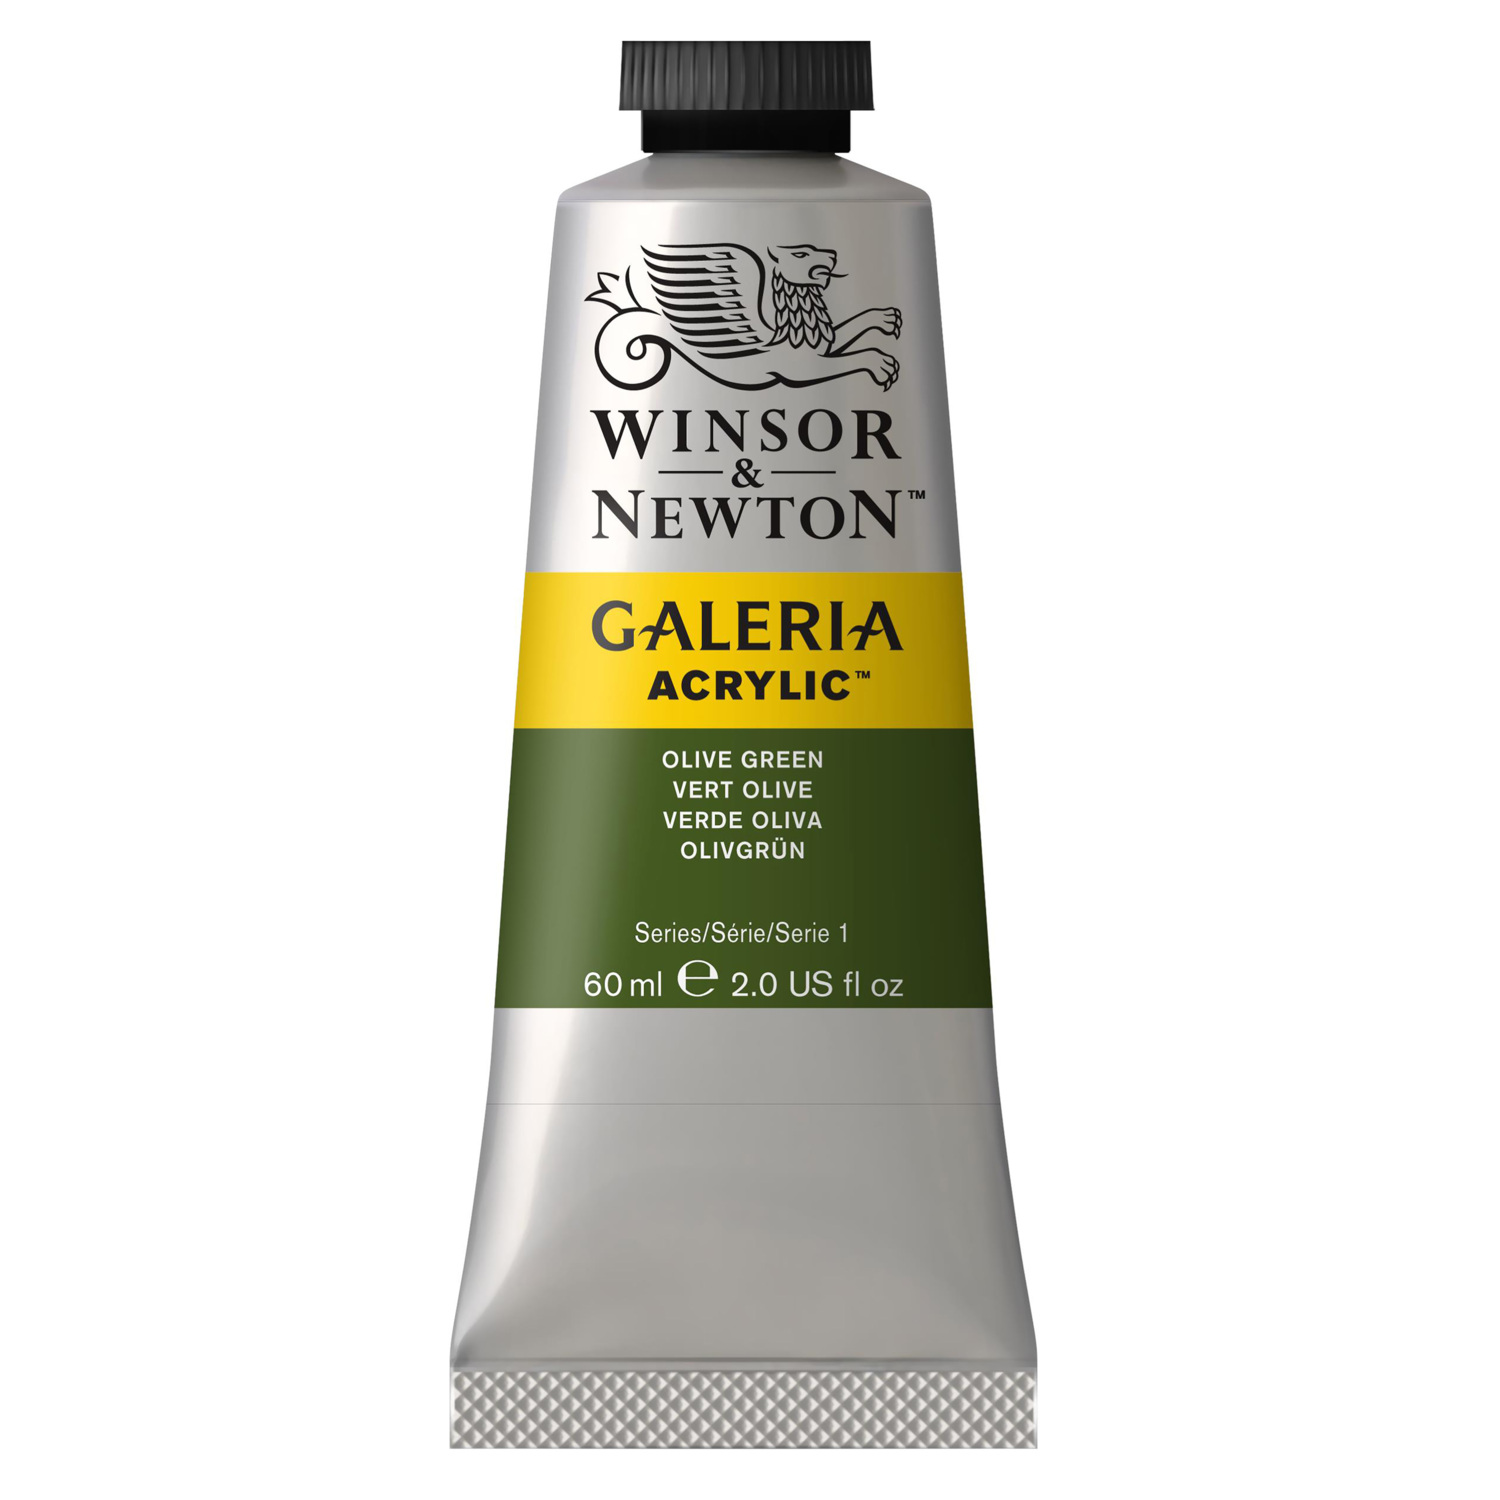 Winsor and Newton 60ml Galeria Acrylic Paint - Olive Green Image 1